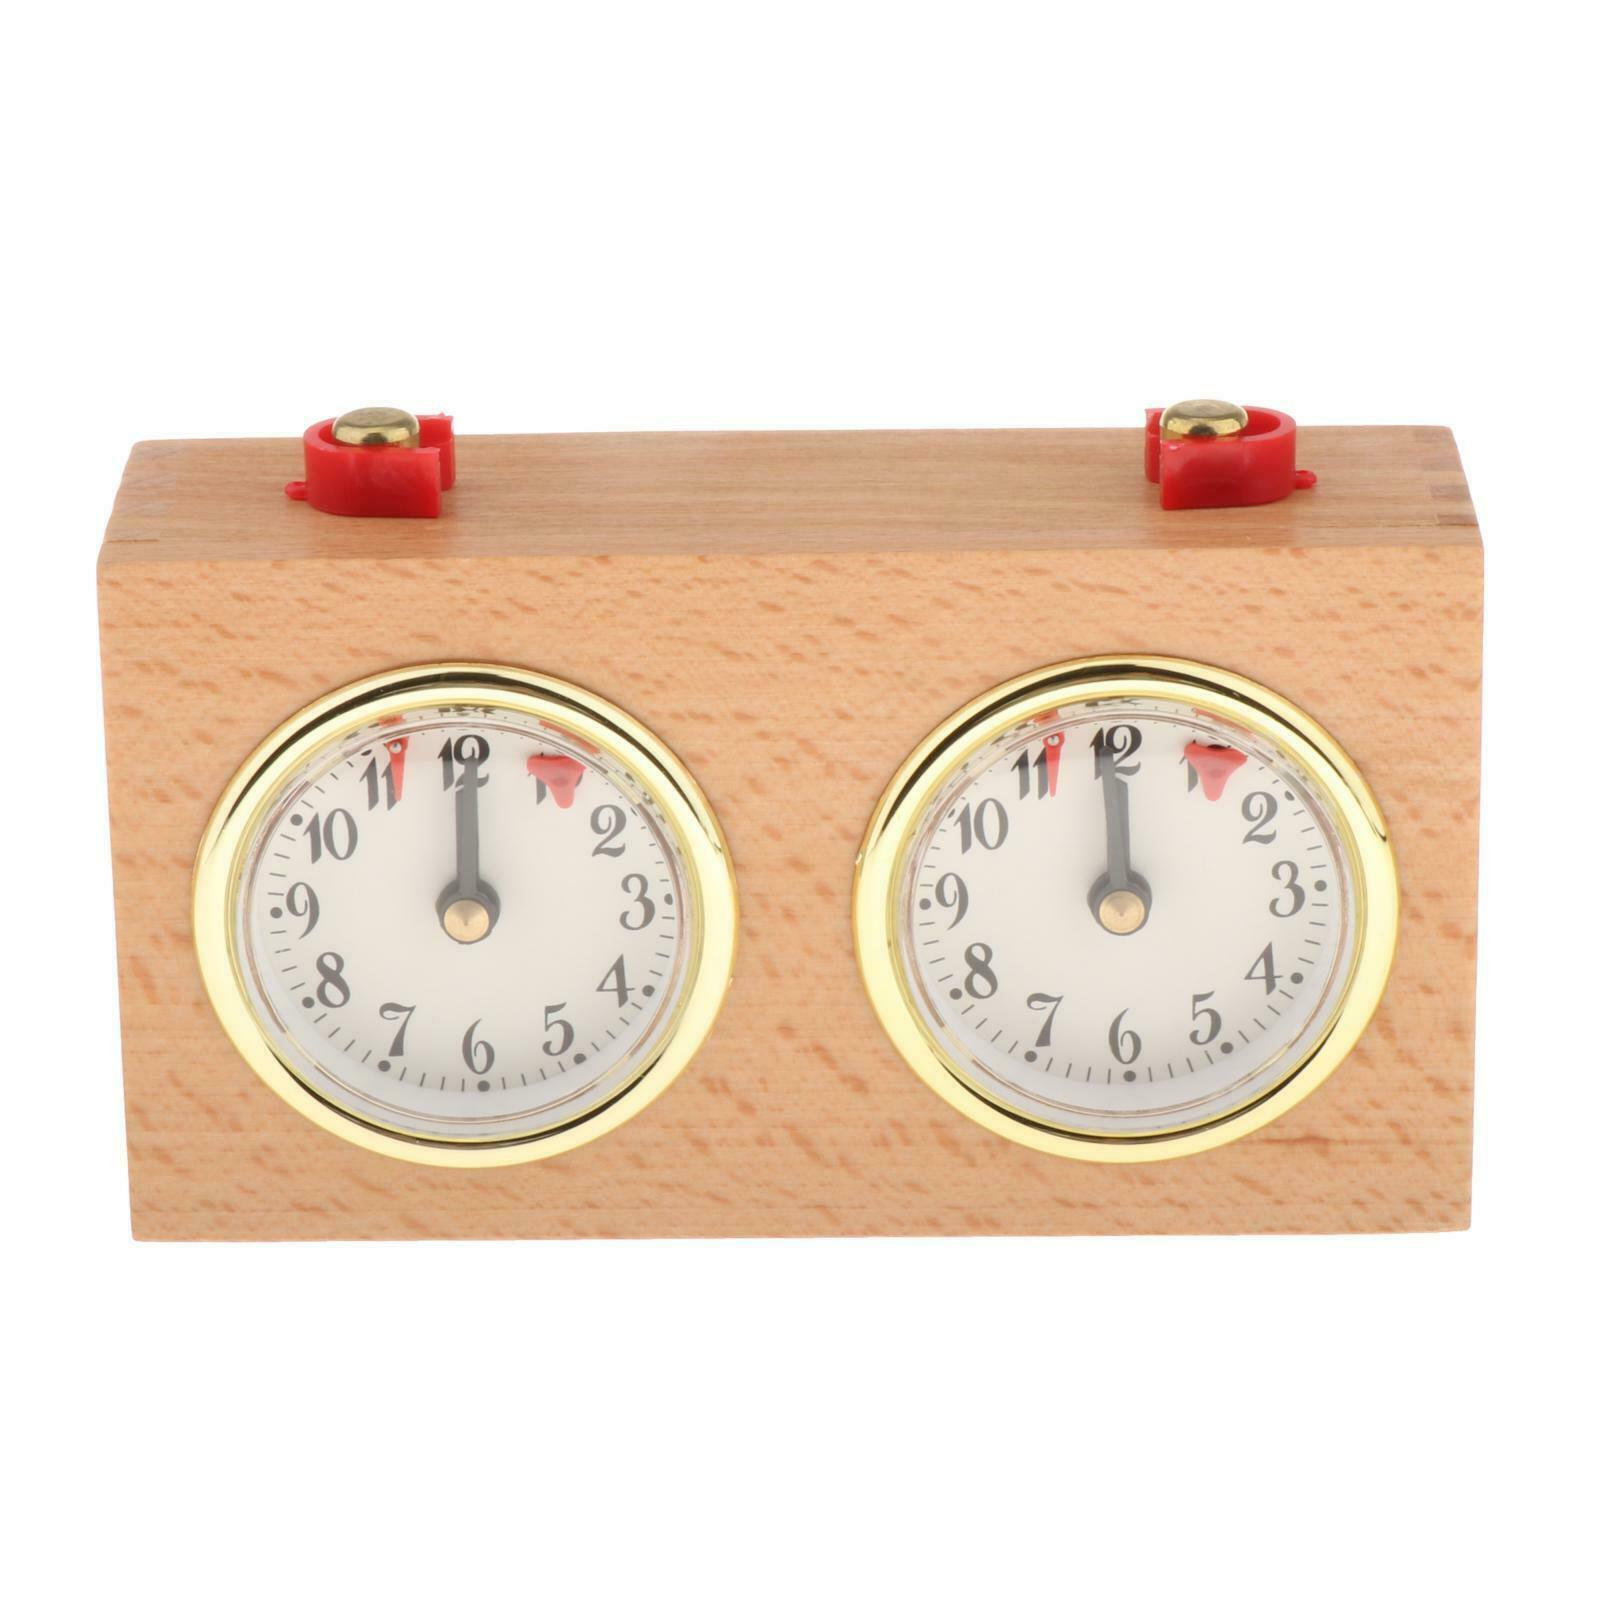 Wooden Analog Chess Clock Timer Gift Wind-Up Count Up Down Game Board Clock